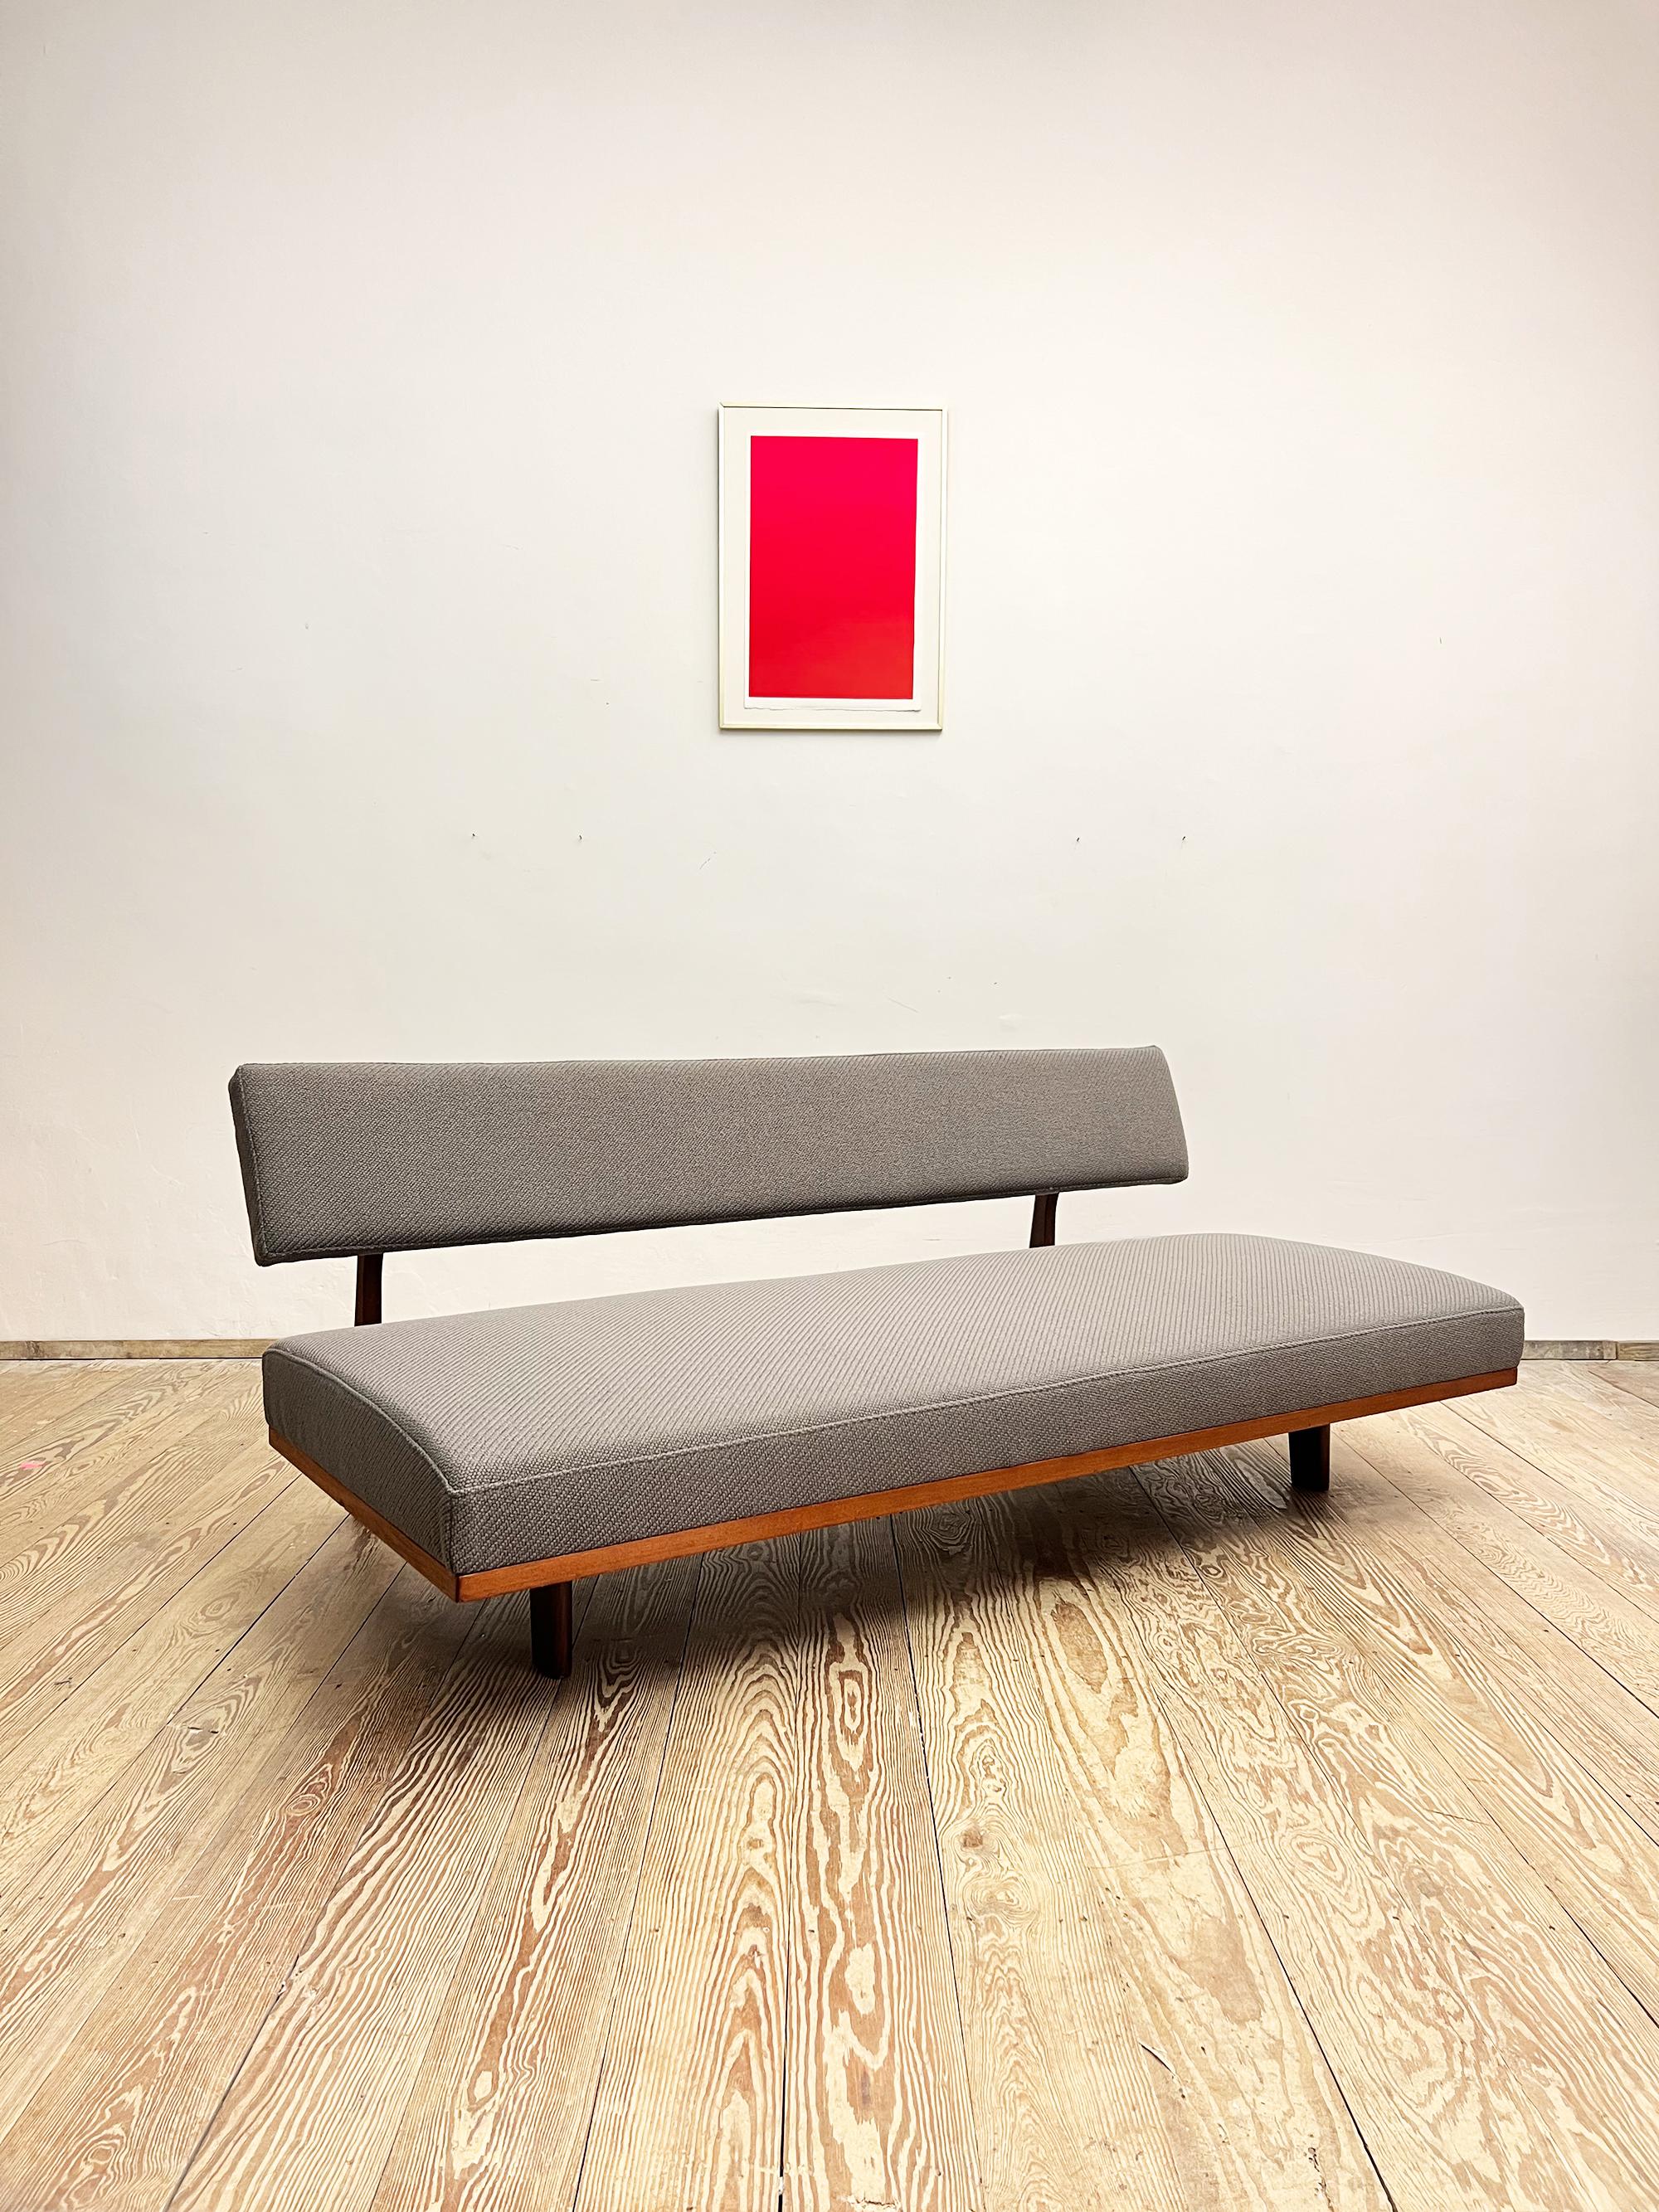 Dimensions 85-102 x 190 x 74  41 cm (Depth x Width x Height / Seat height)

This unique mid-century design sofa/daybed was designed by Hans Bellmann for Wilkhahn, Germany in the 1960s. The sofa comes in a beautiful solid mahogany-colored wood frame